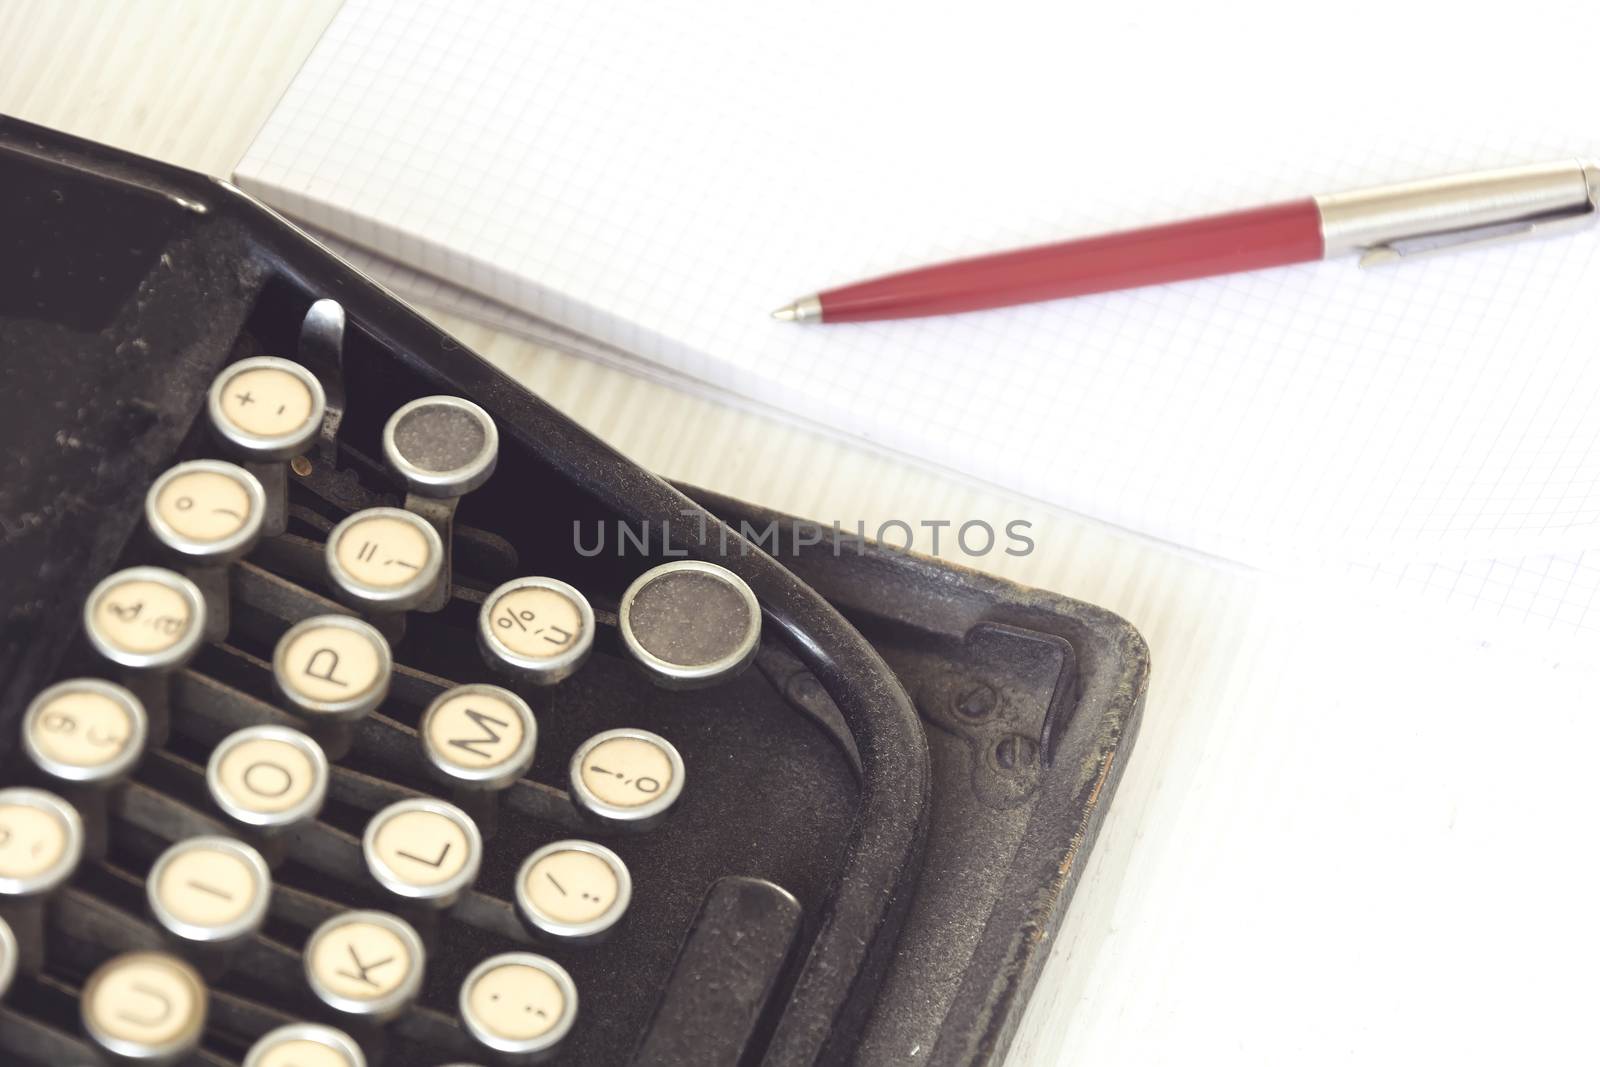 Old typewriter with a notepad and a pen by rarrarorro